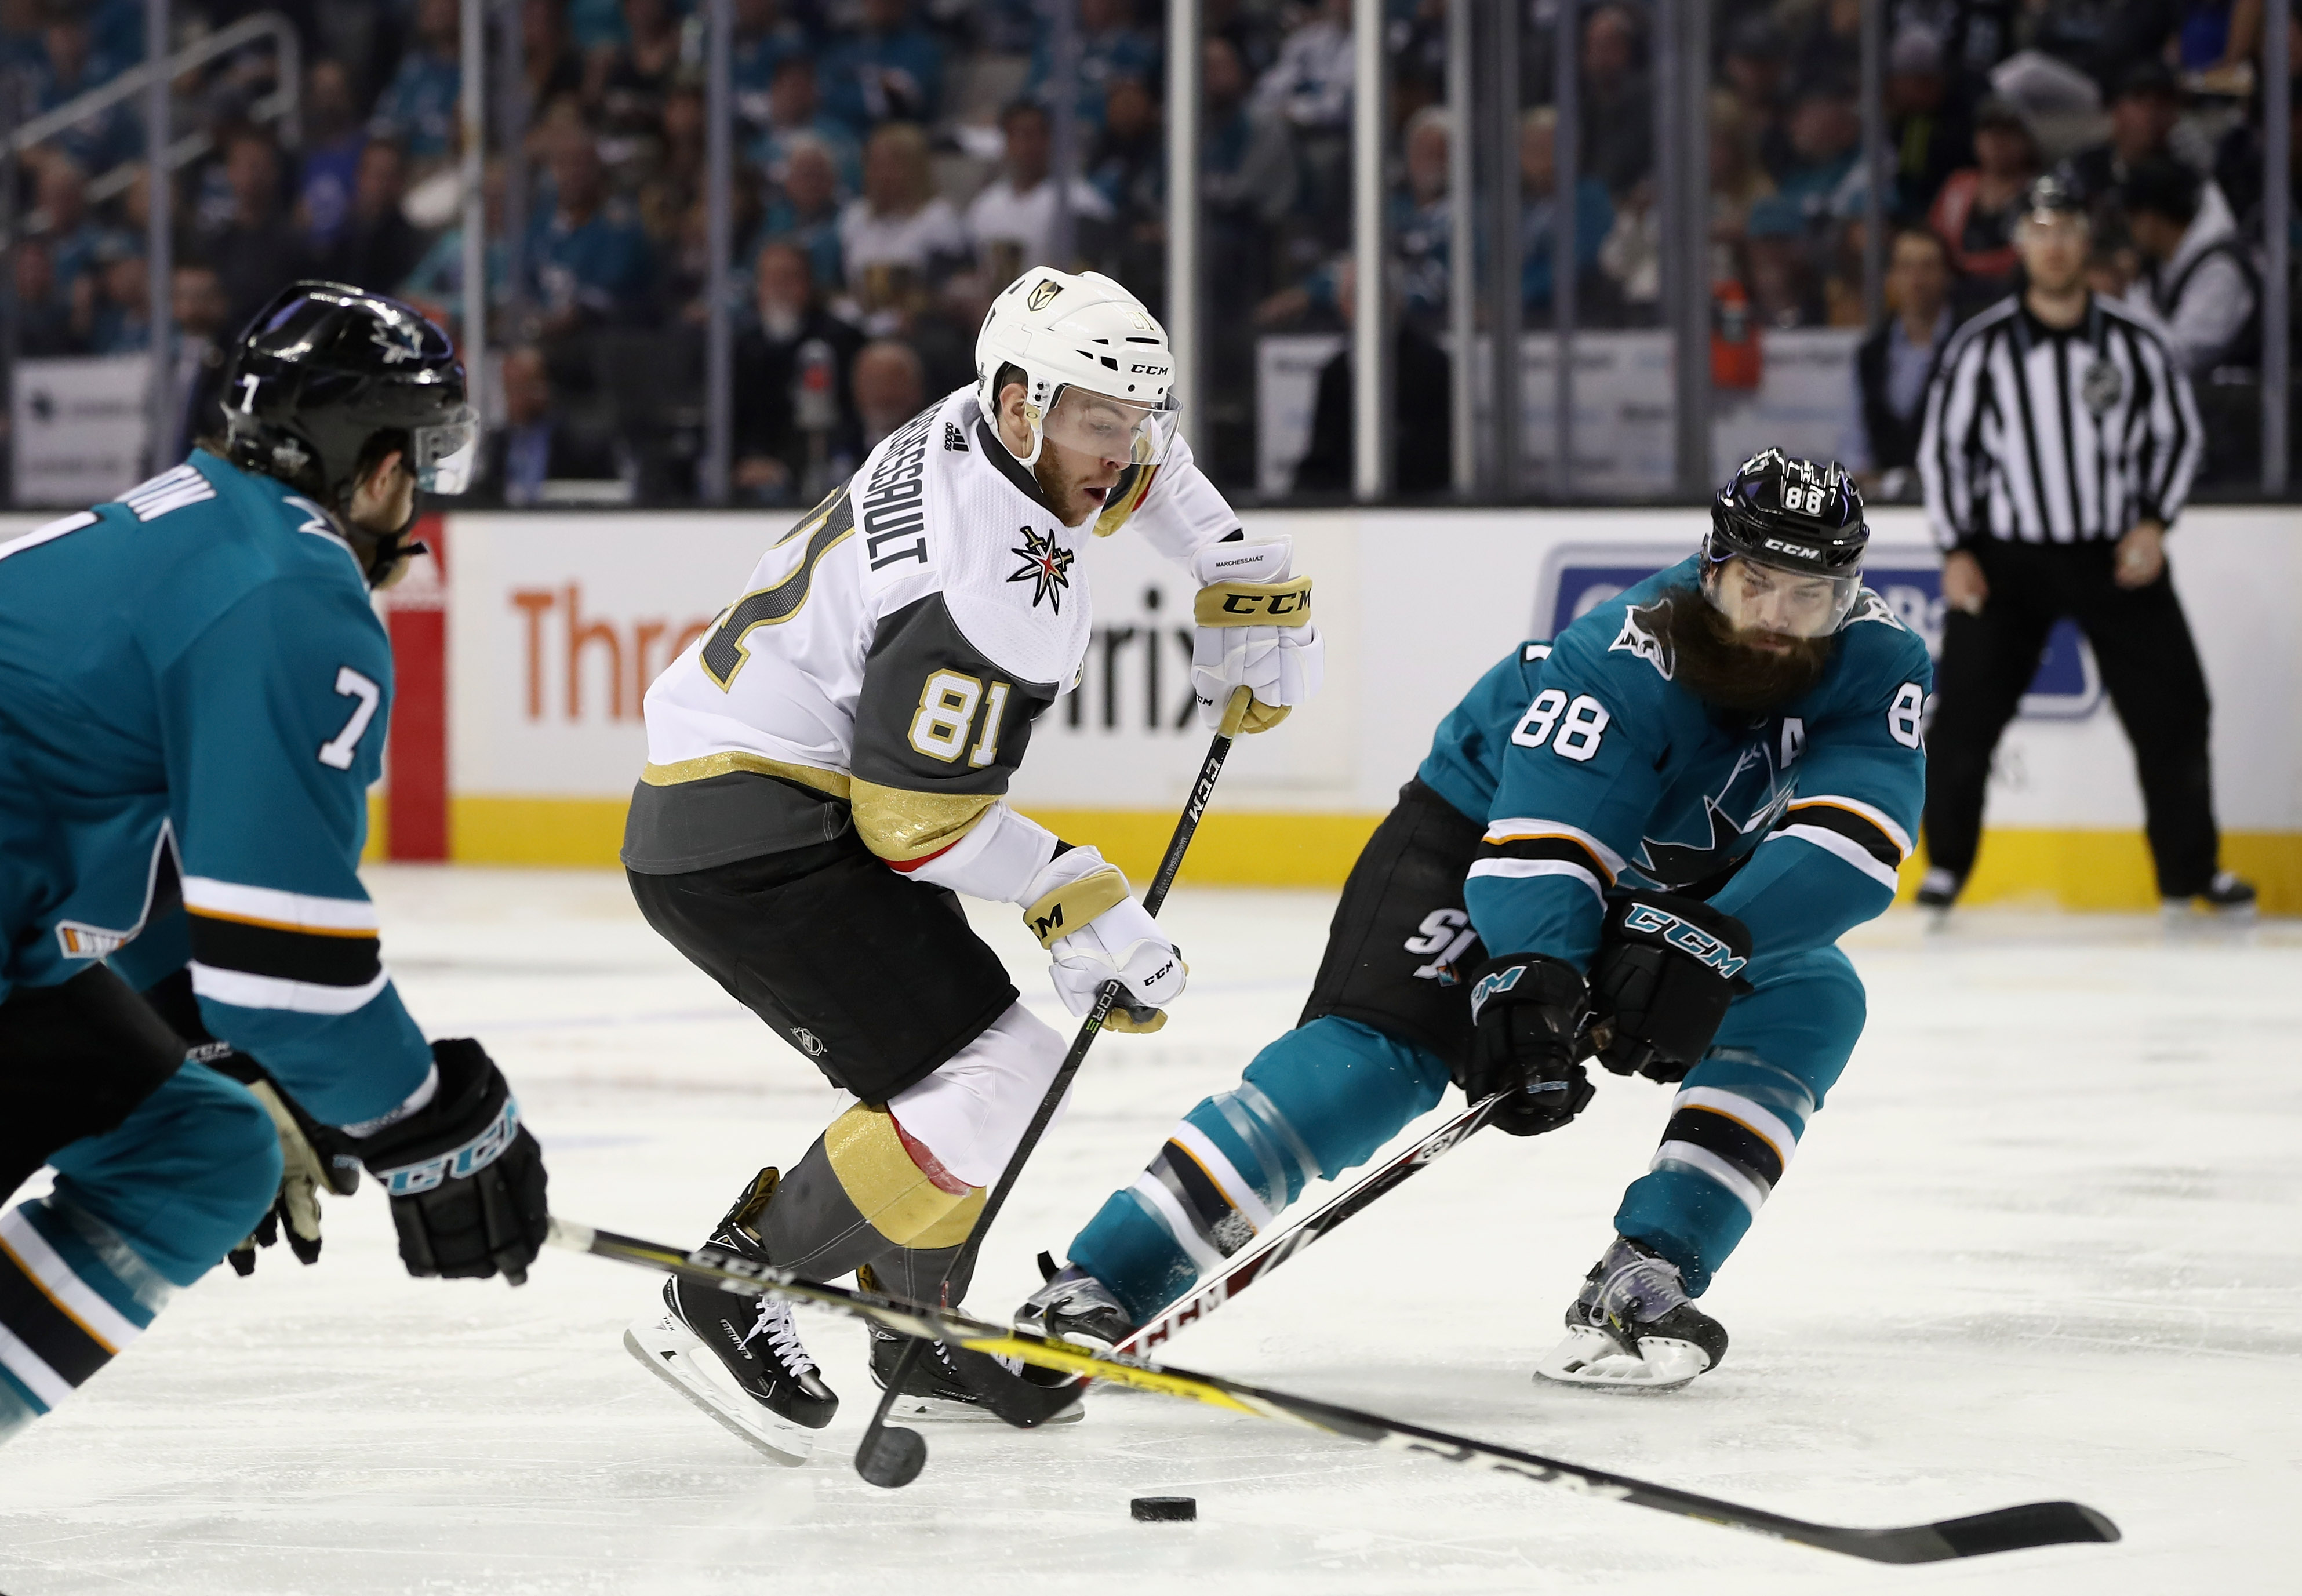 SAN JOSE, CA - APRIL 30: Jonathan Marchessault #81 of the Vegas Golden Knights tries to skate between Brent Burns #88 and Paul Martin #7 of the San Jose Sharks during Game Three of the Western Conference Second Round during the 2018 NHL Stanley Cup Playof